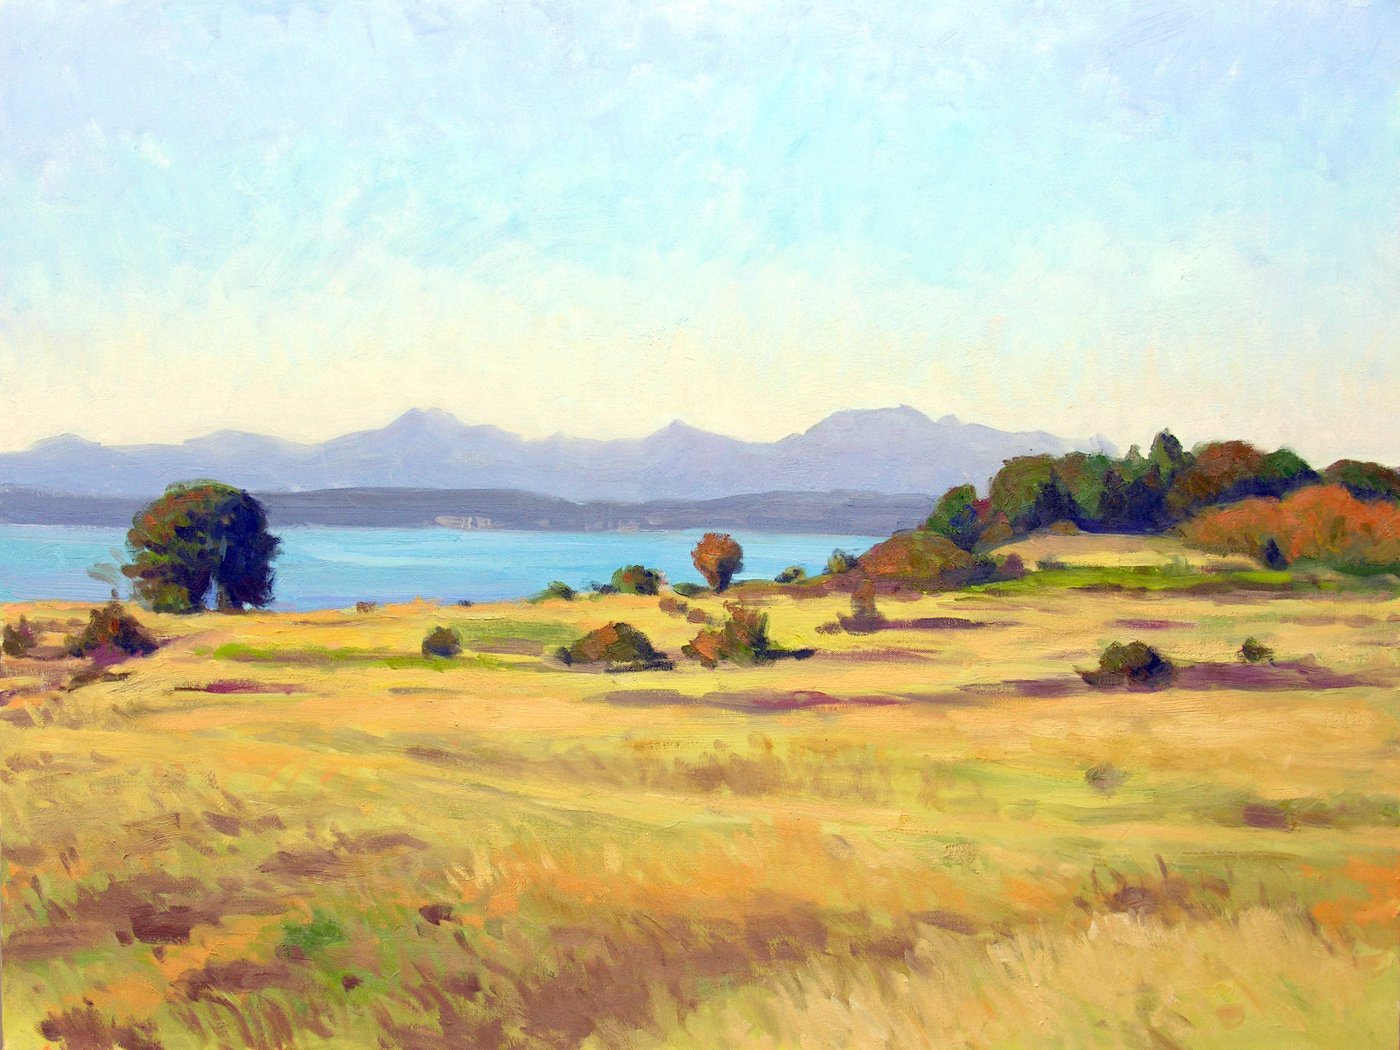 Discovery Park, oil on canvas, 30 X 40 inches, copyright ©2007